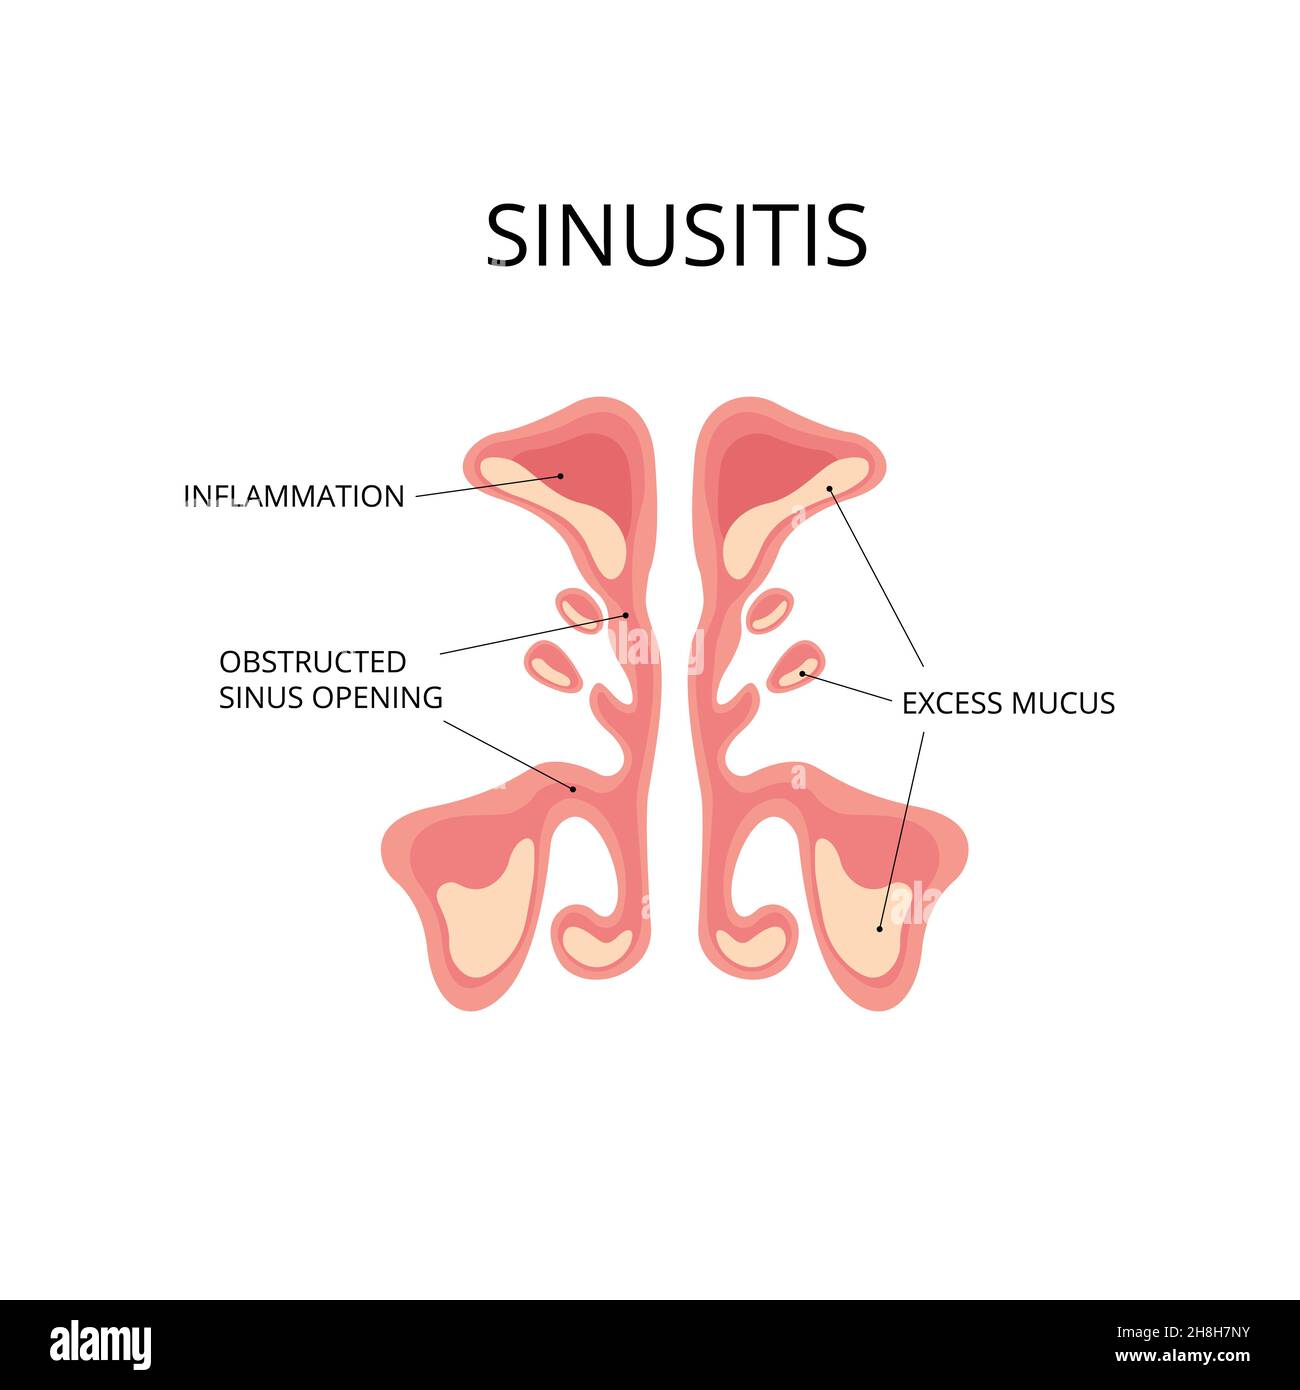 Inflammated sinus with excess mucus and obstrusted sinus openings. Infection, nasal disease, anatomy. Ffor topics like diagnosis, congestion Stock Vector